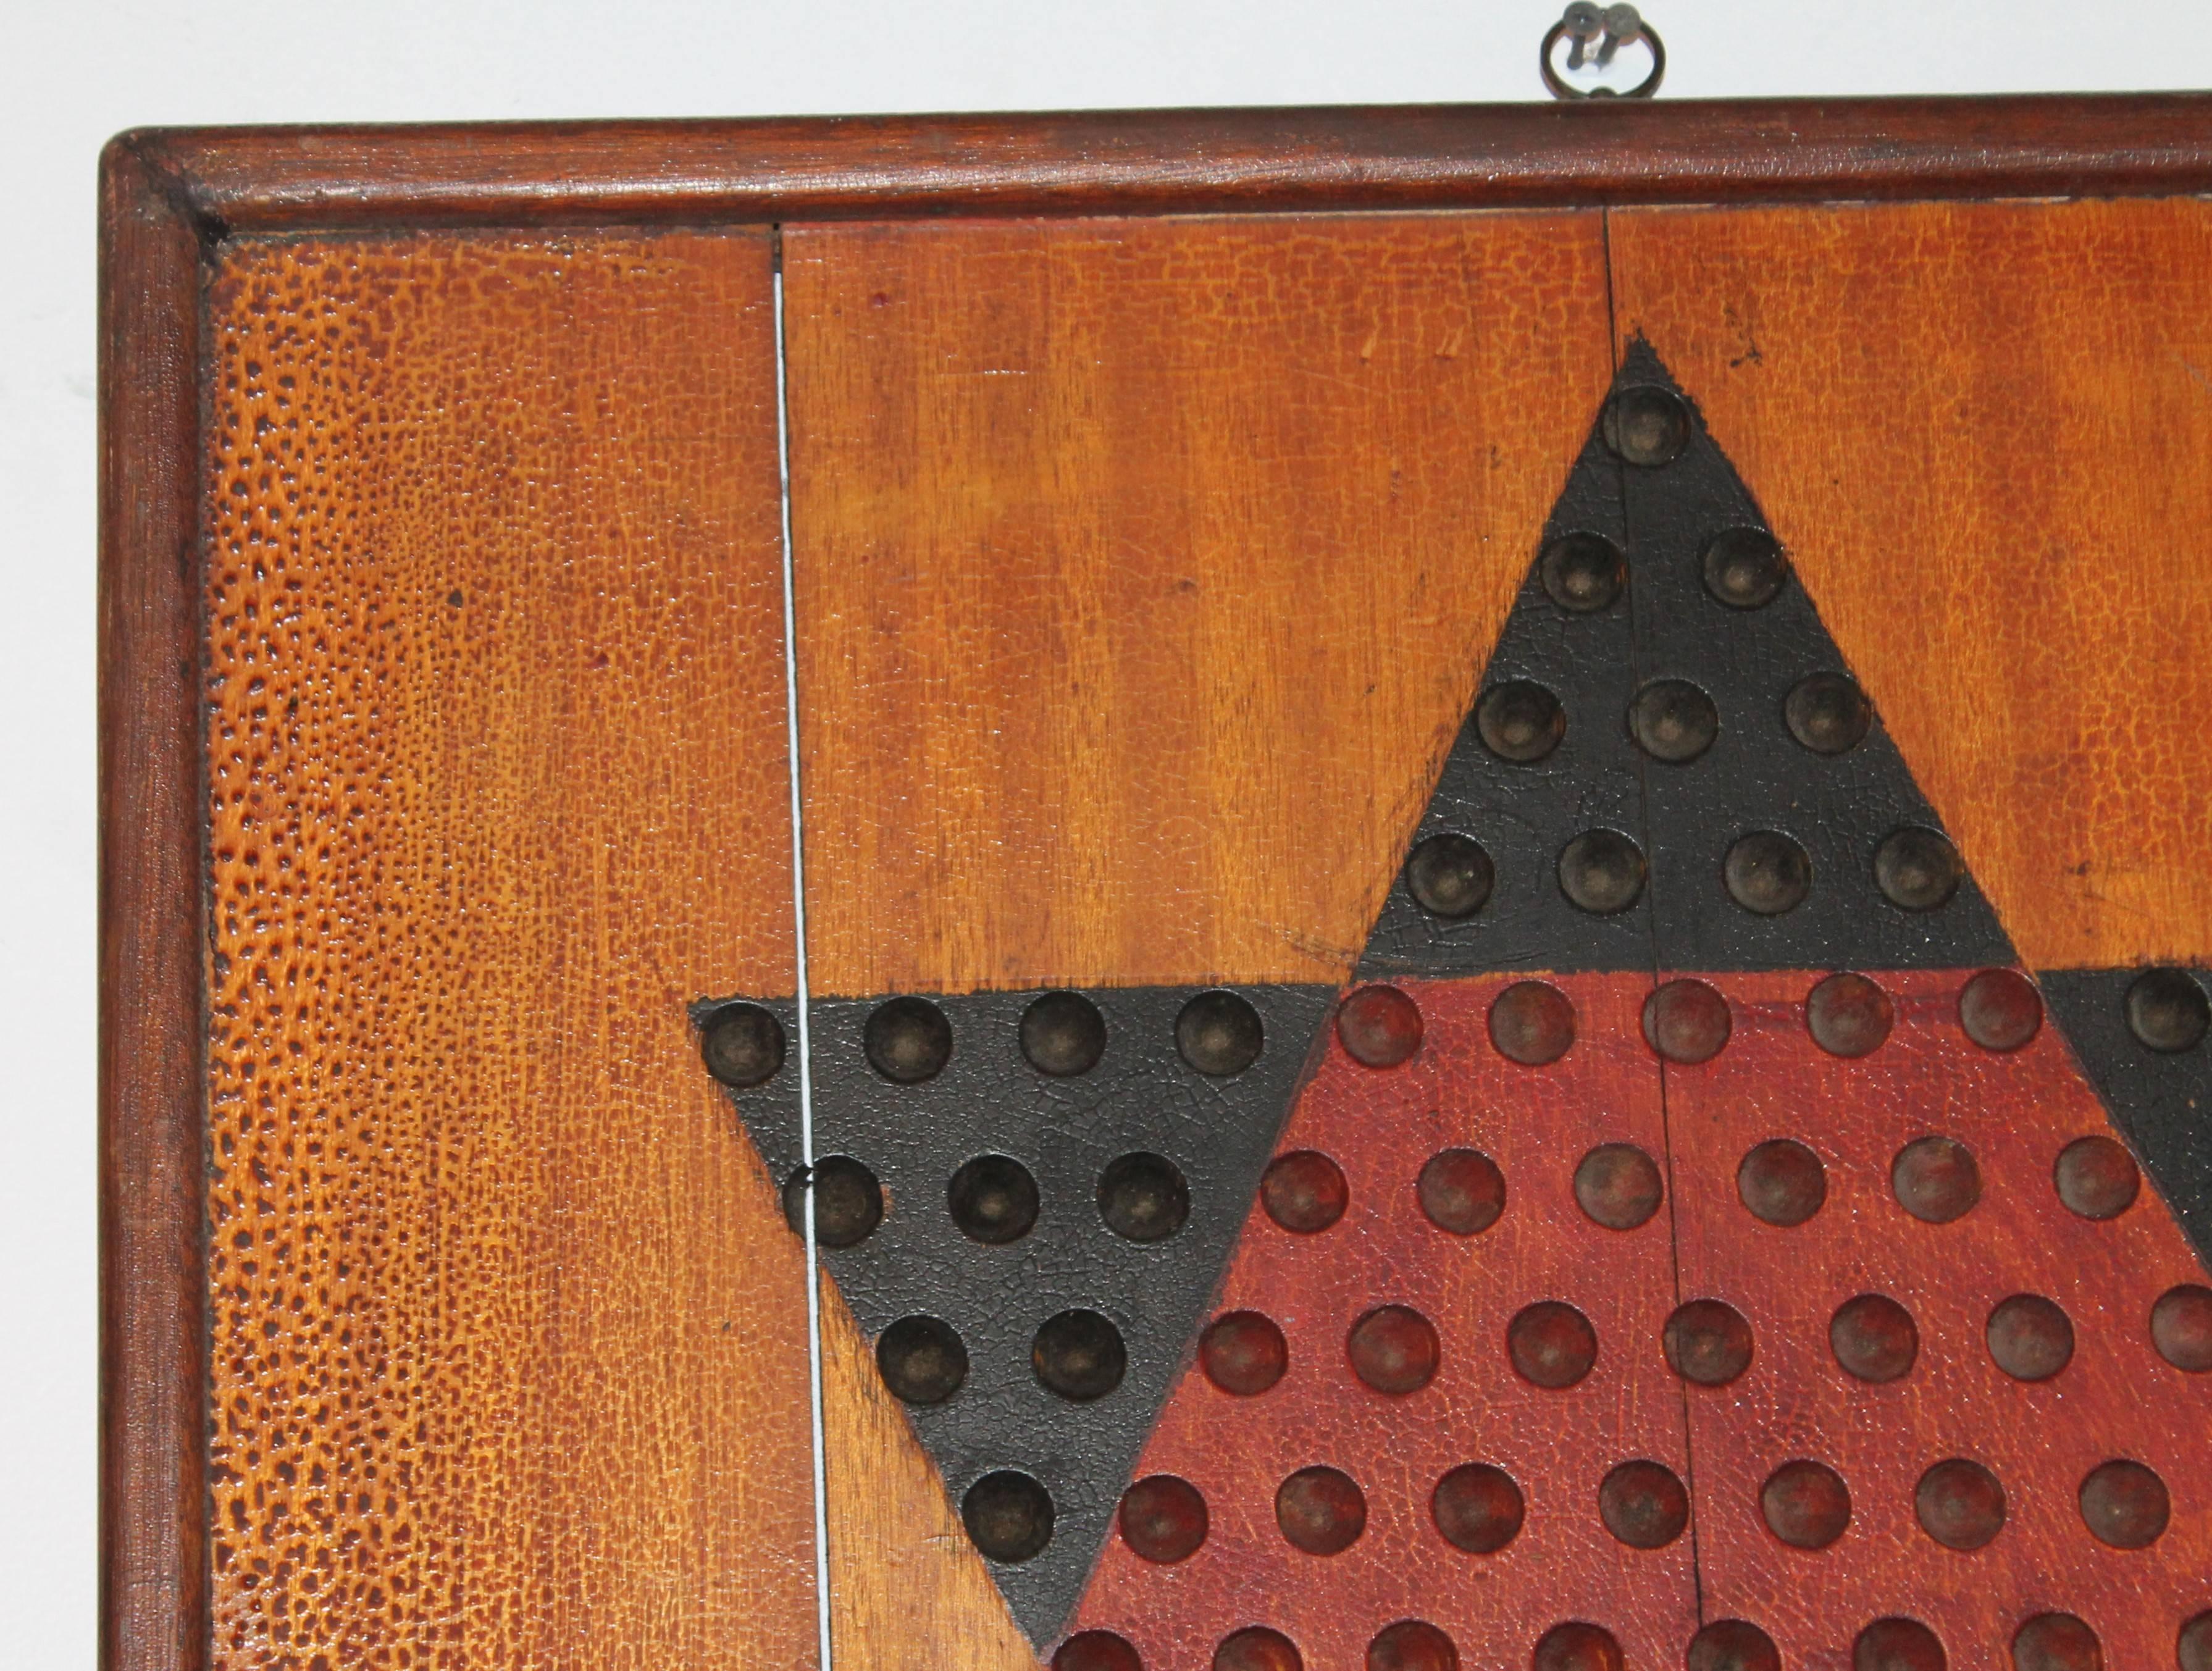 This double-sided original painted monumental Chinese checkers and checker board in one has a spectacular grungy undisturbed surface. This thick board has the original brass hanger on top. The condition is very good. This is a one of a kind handmade